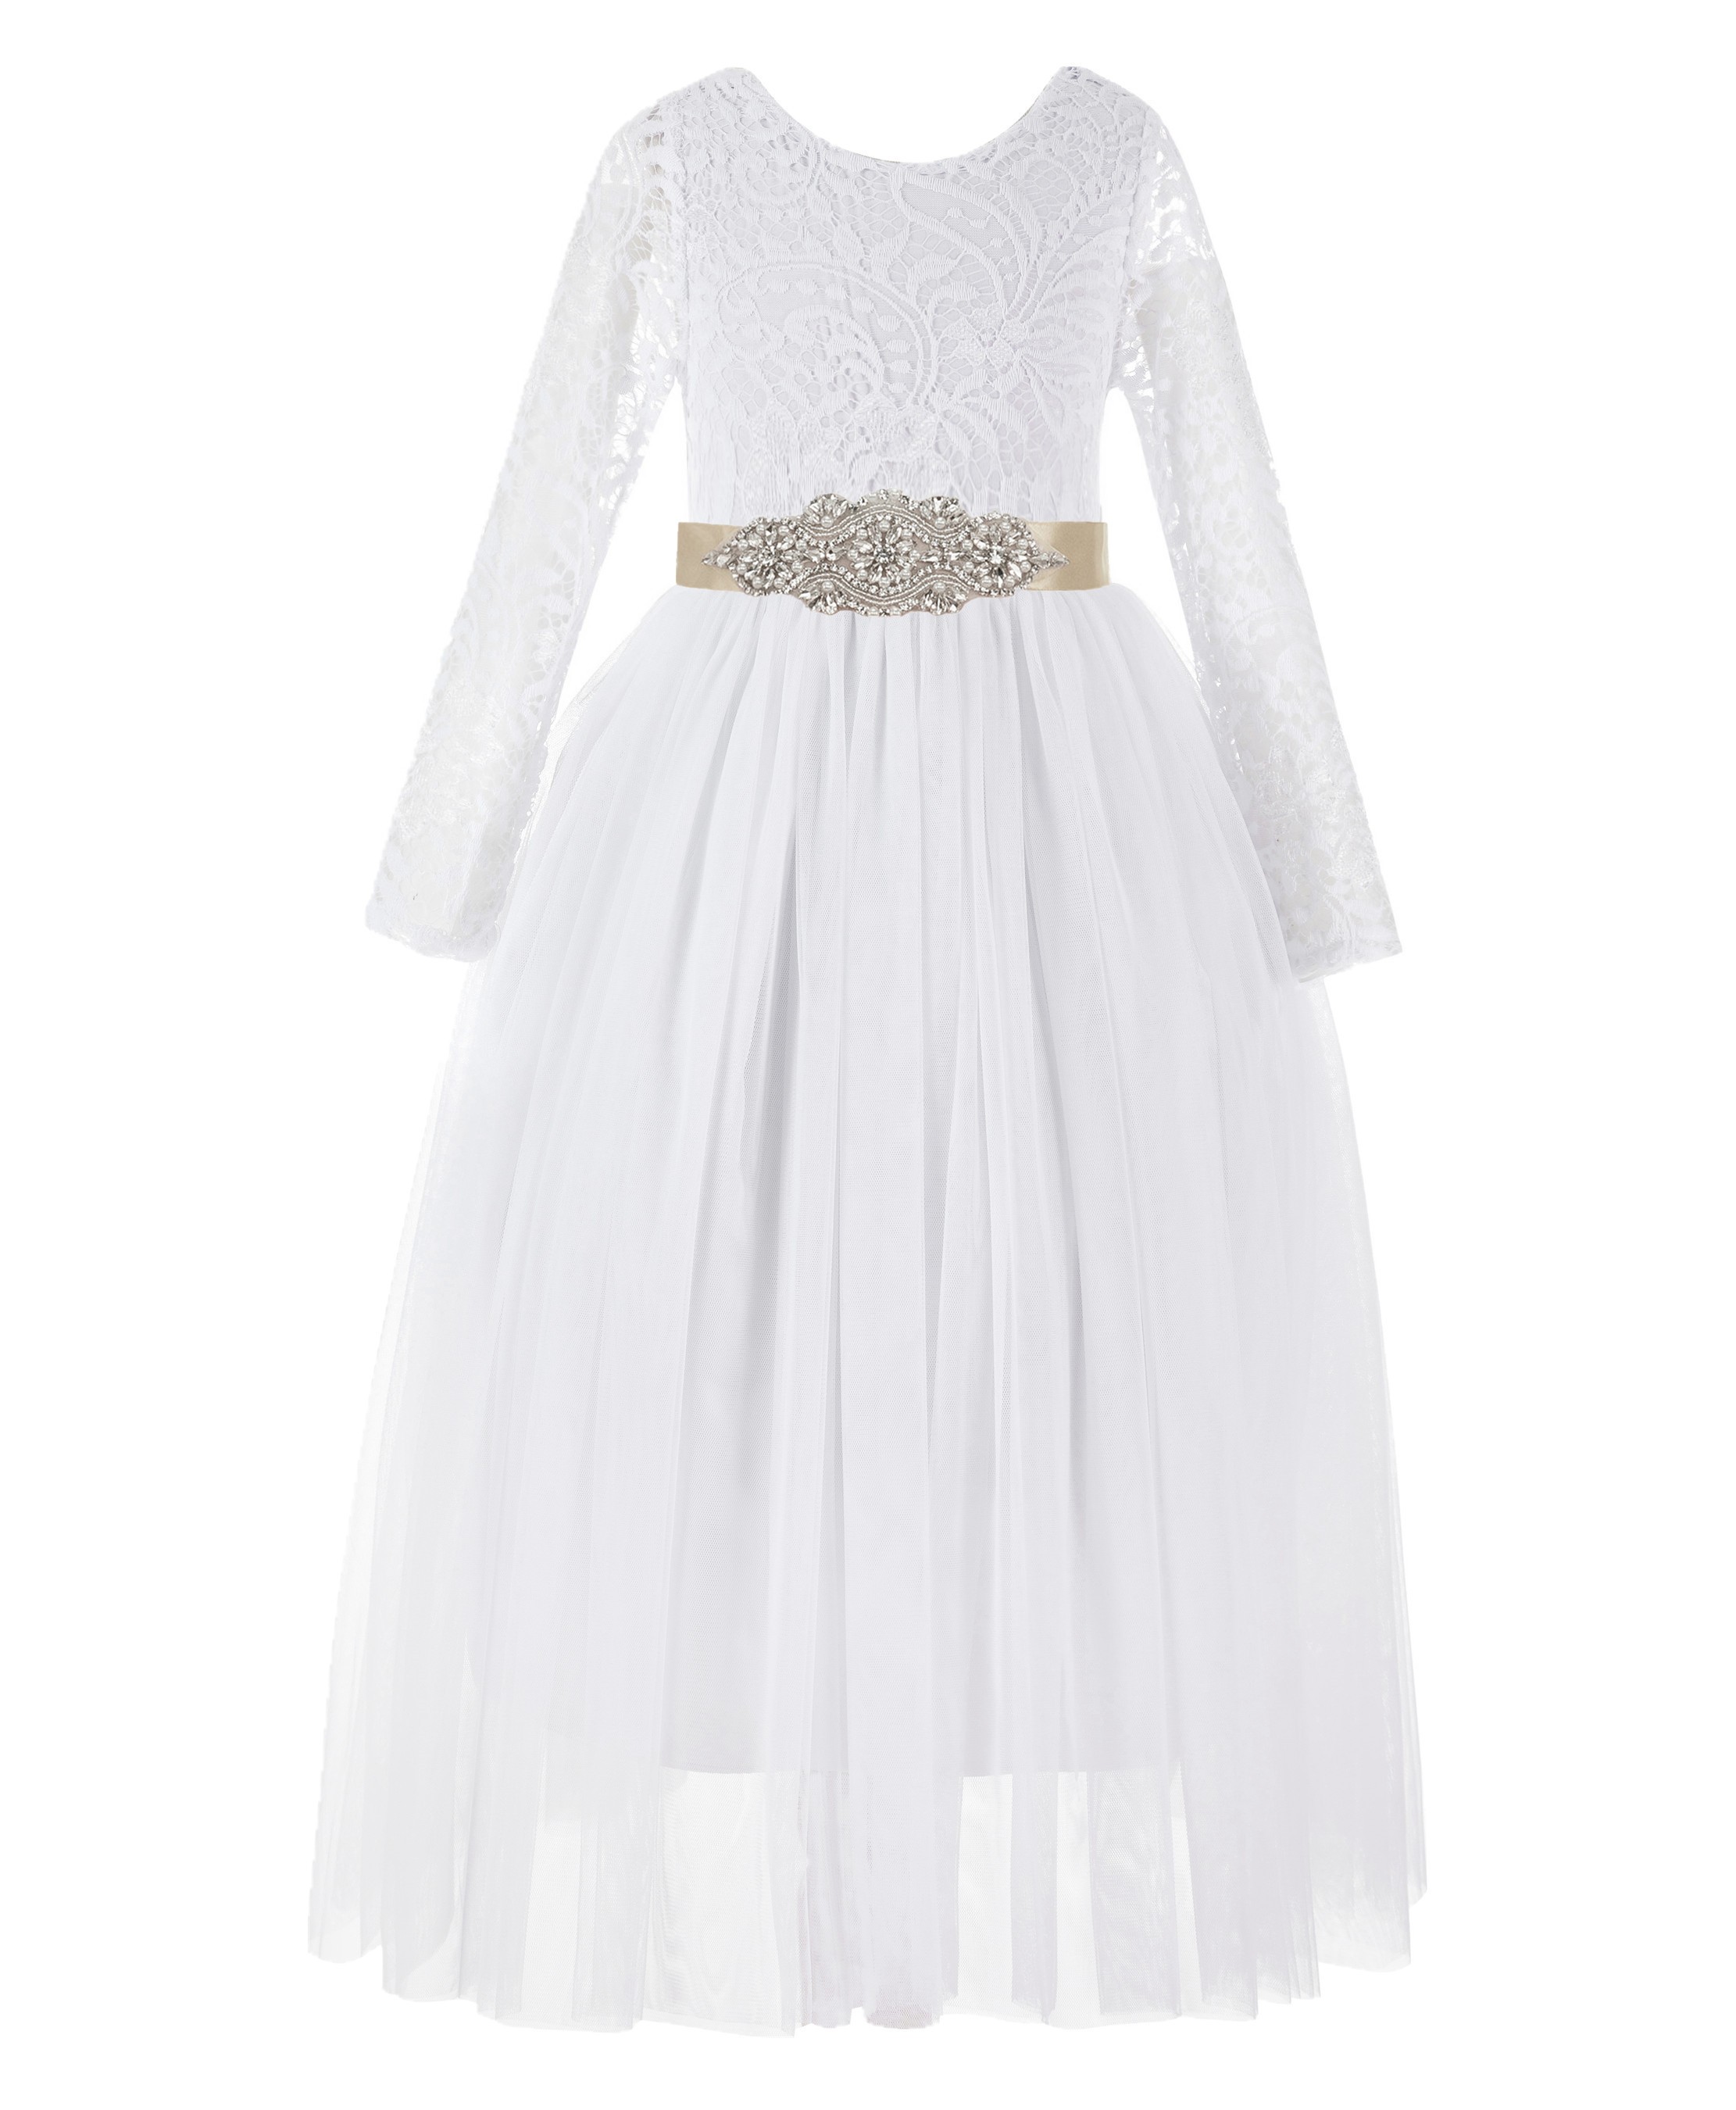 White / Champagne A-Line V-Back Lace Flower Girl Dress with Sleeves 290R